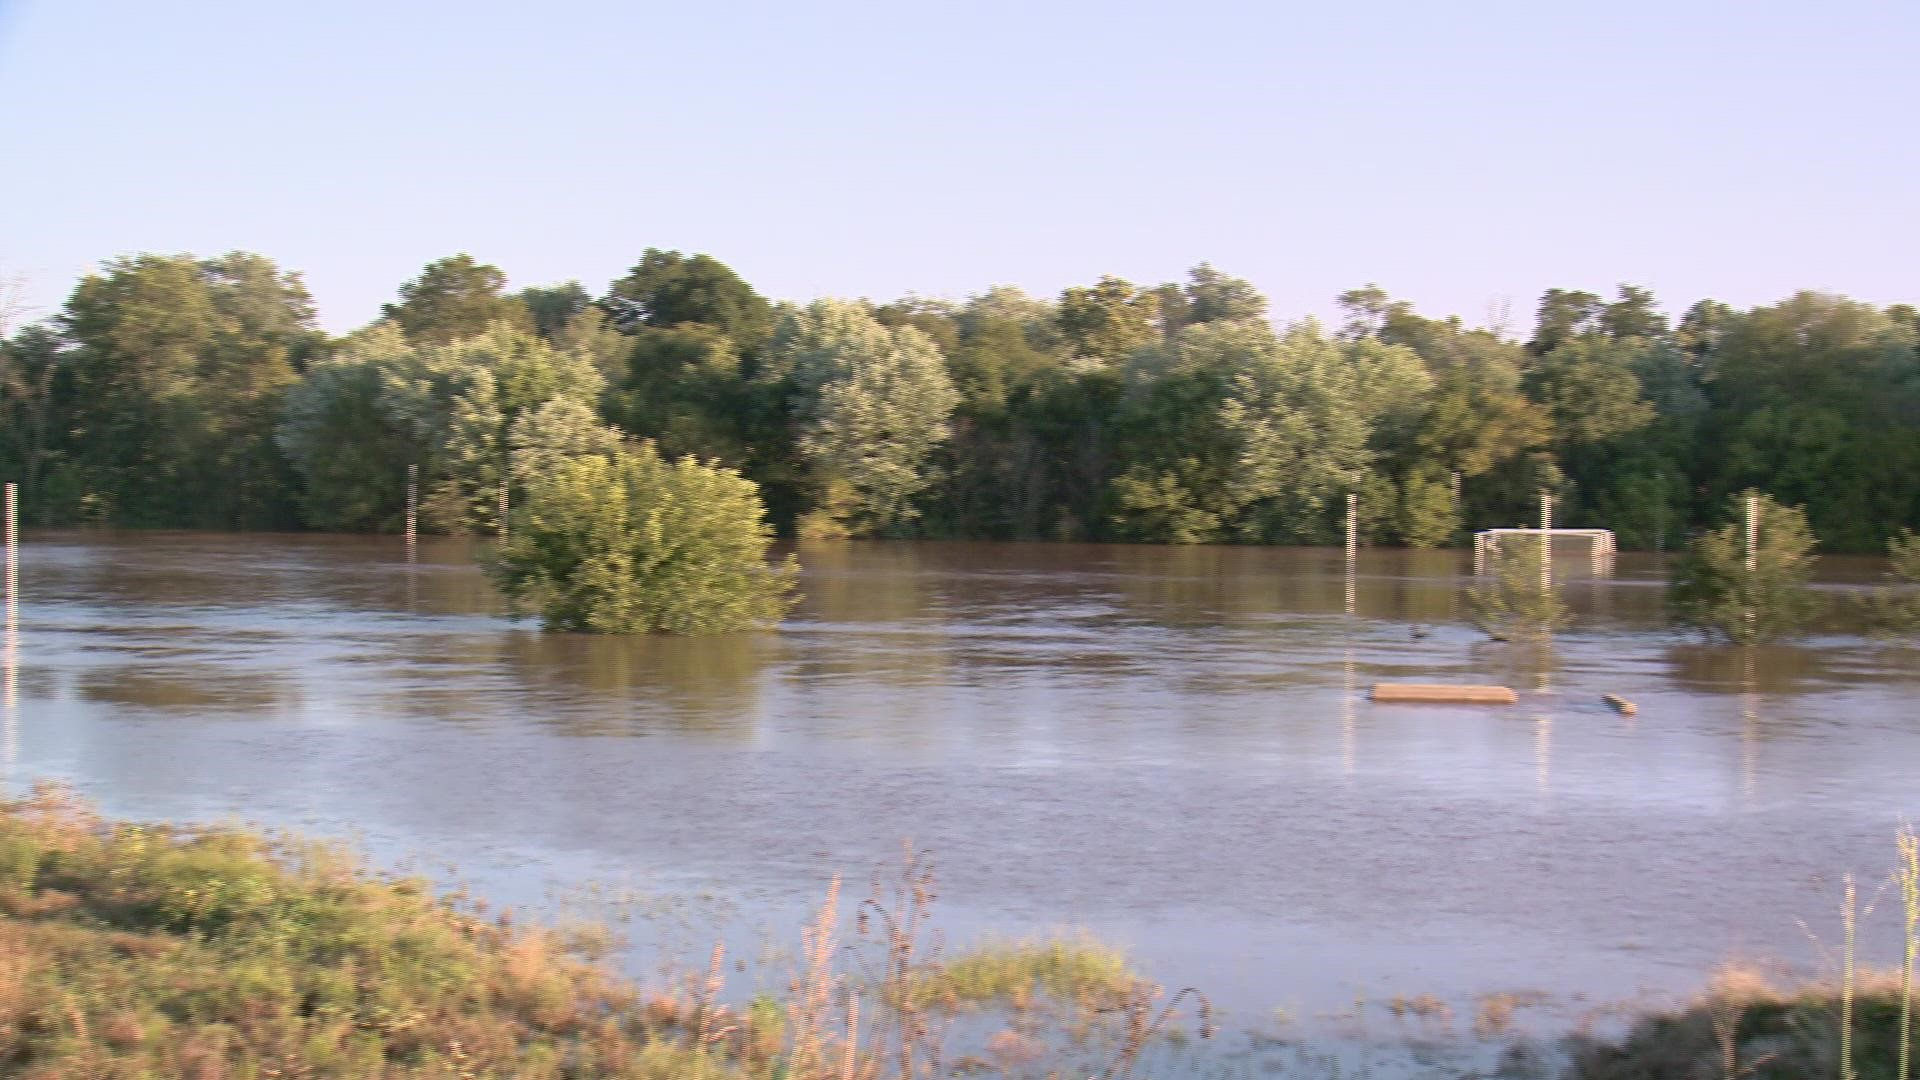 A day after the remnants of Hurricane Ida brought heavy rain and flash flooding to the region, some areas along the Monocacy River were inundated with feet of water.